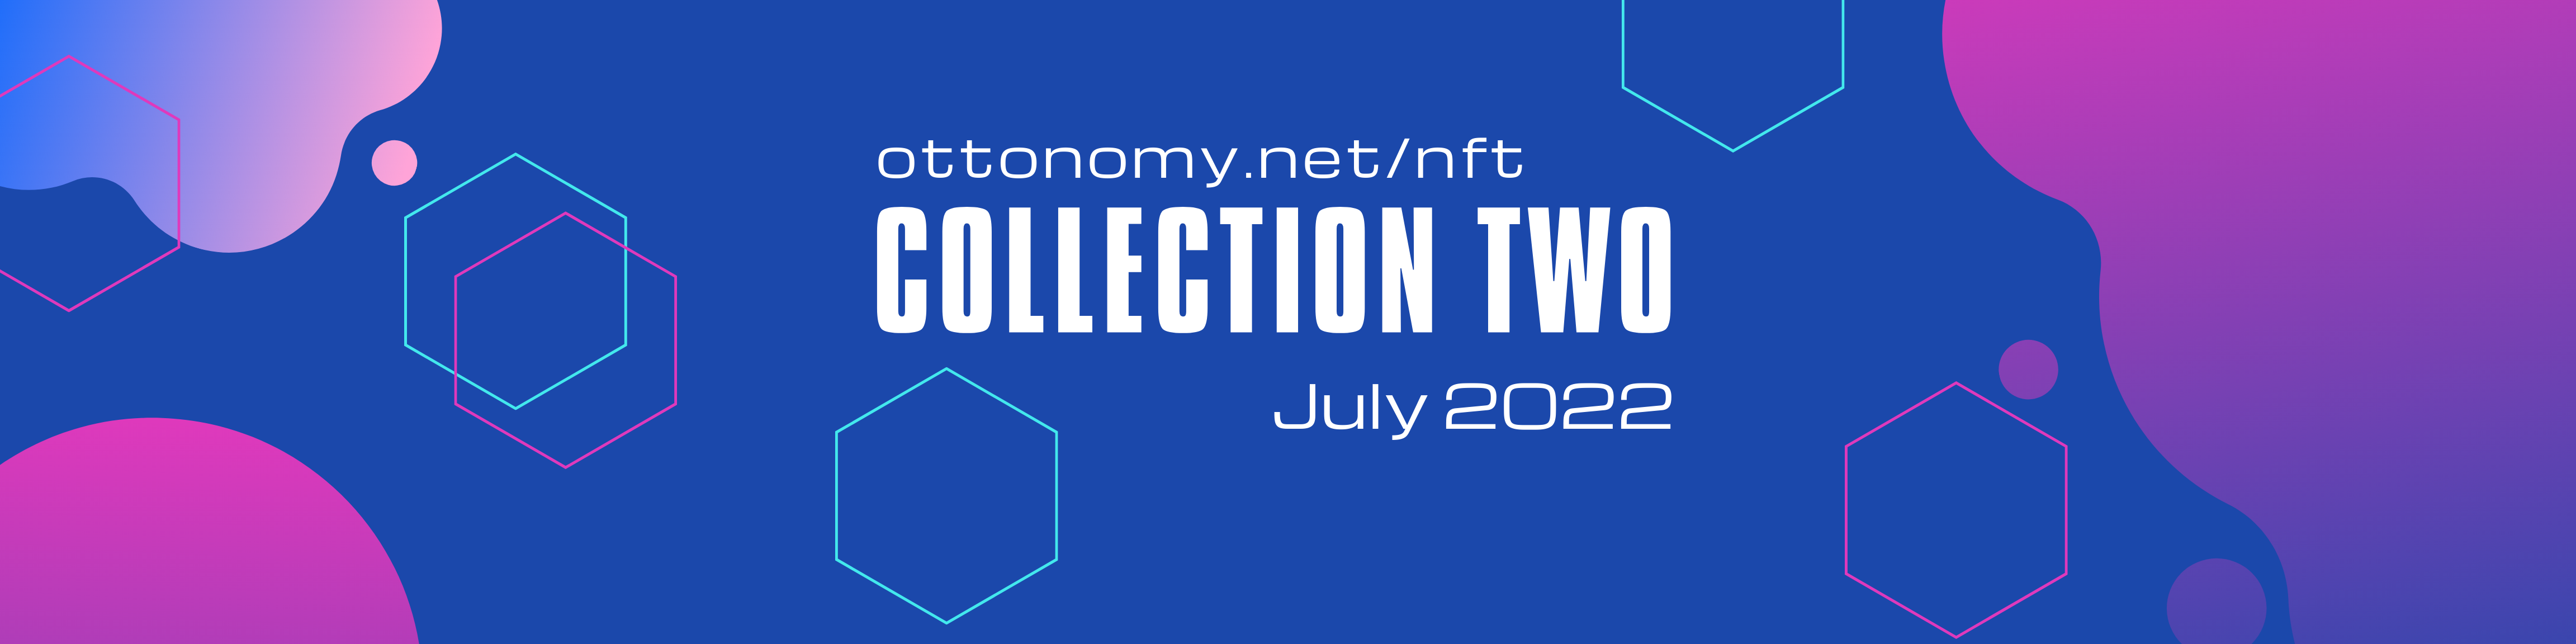 NFT collection two coming July 2022